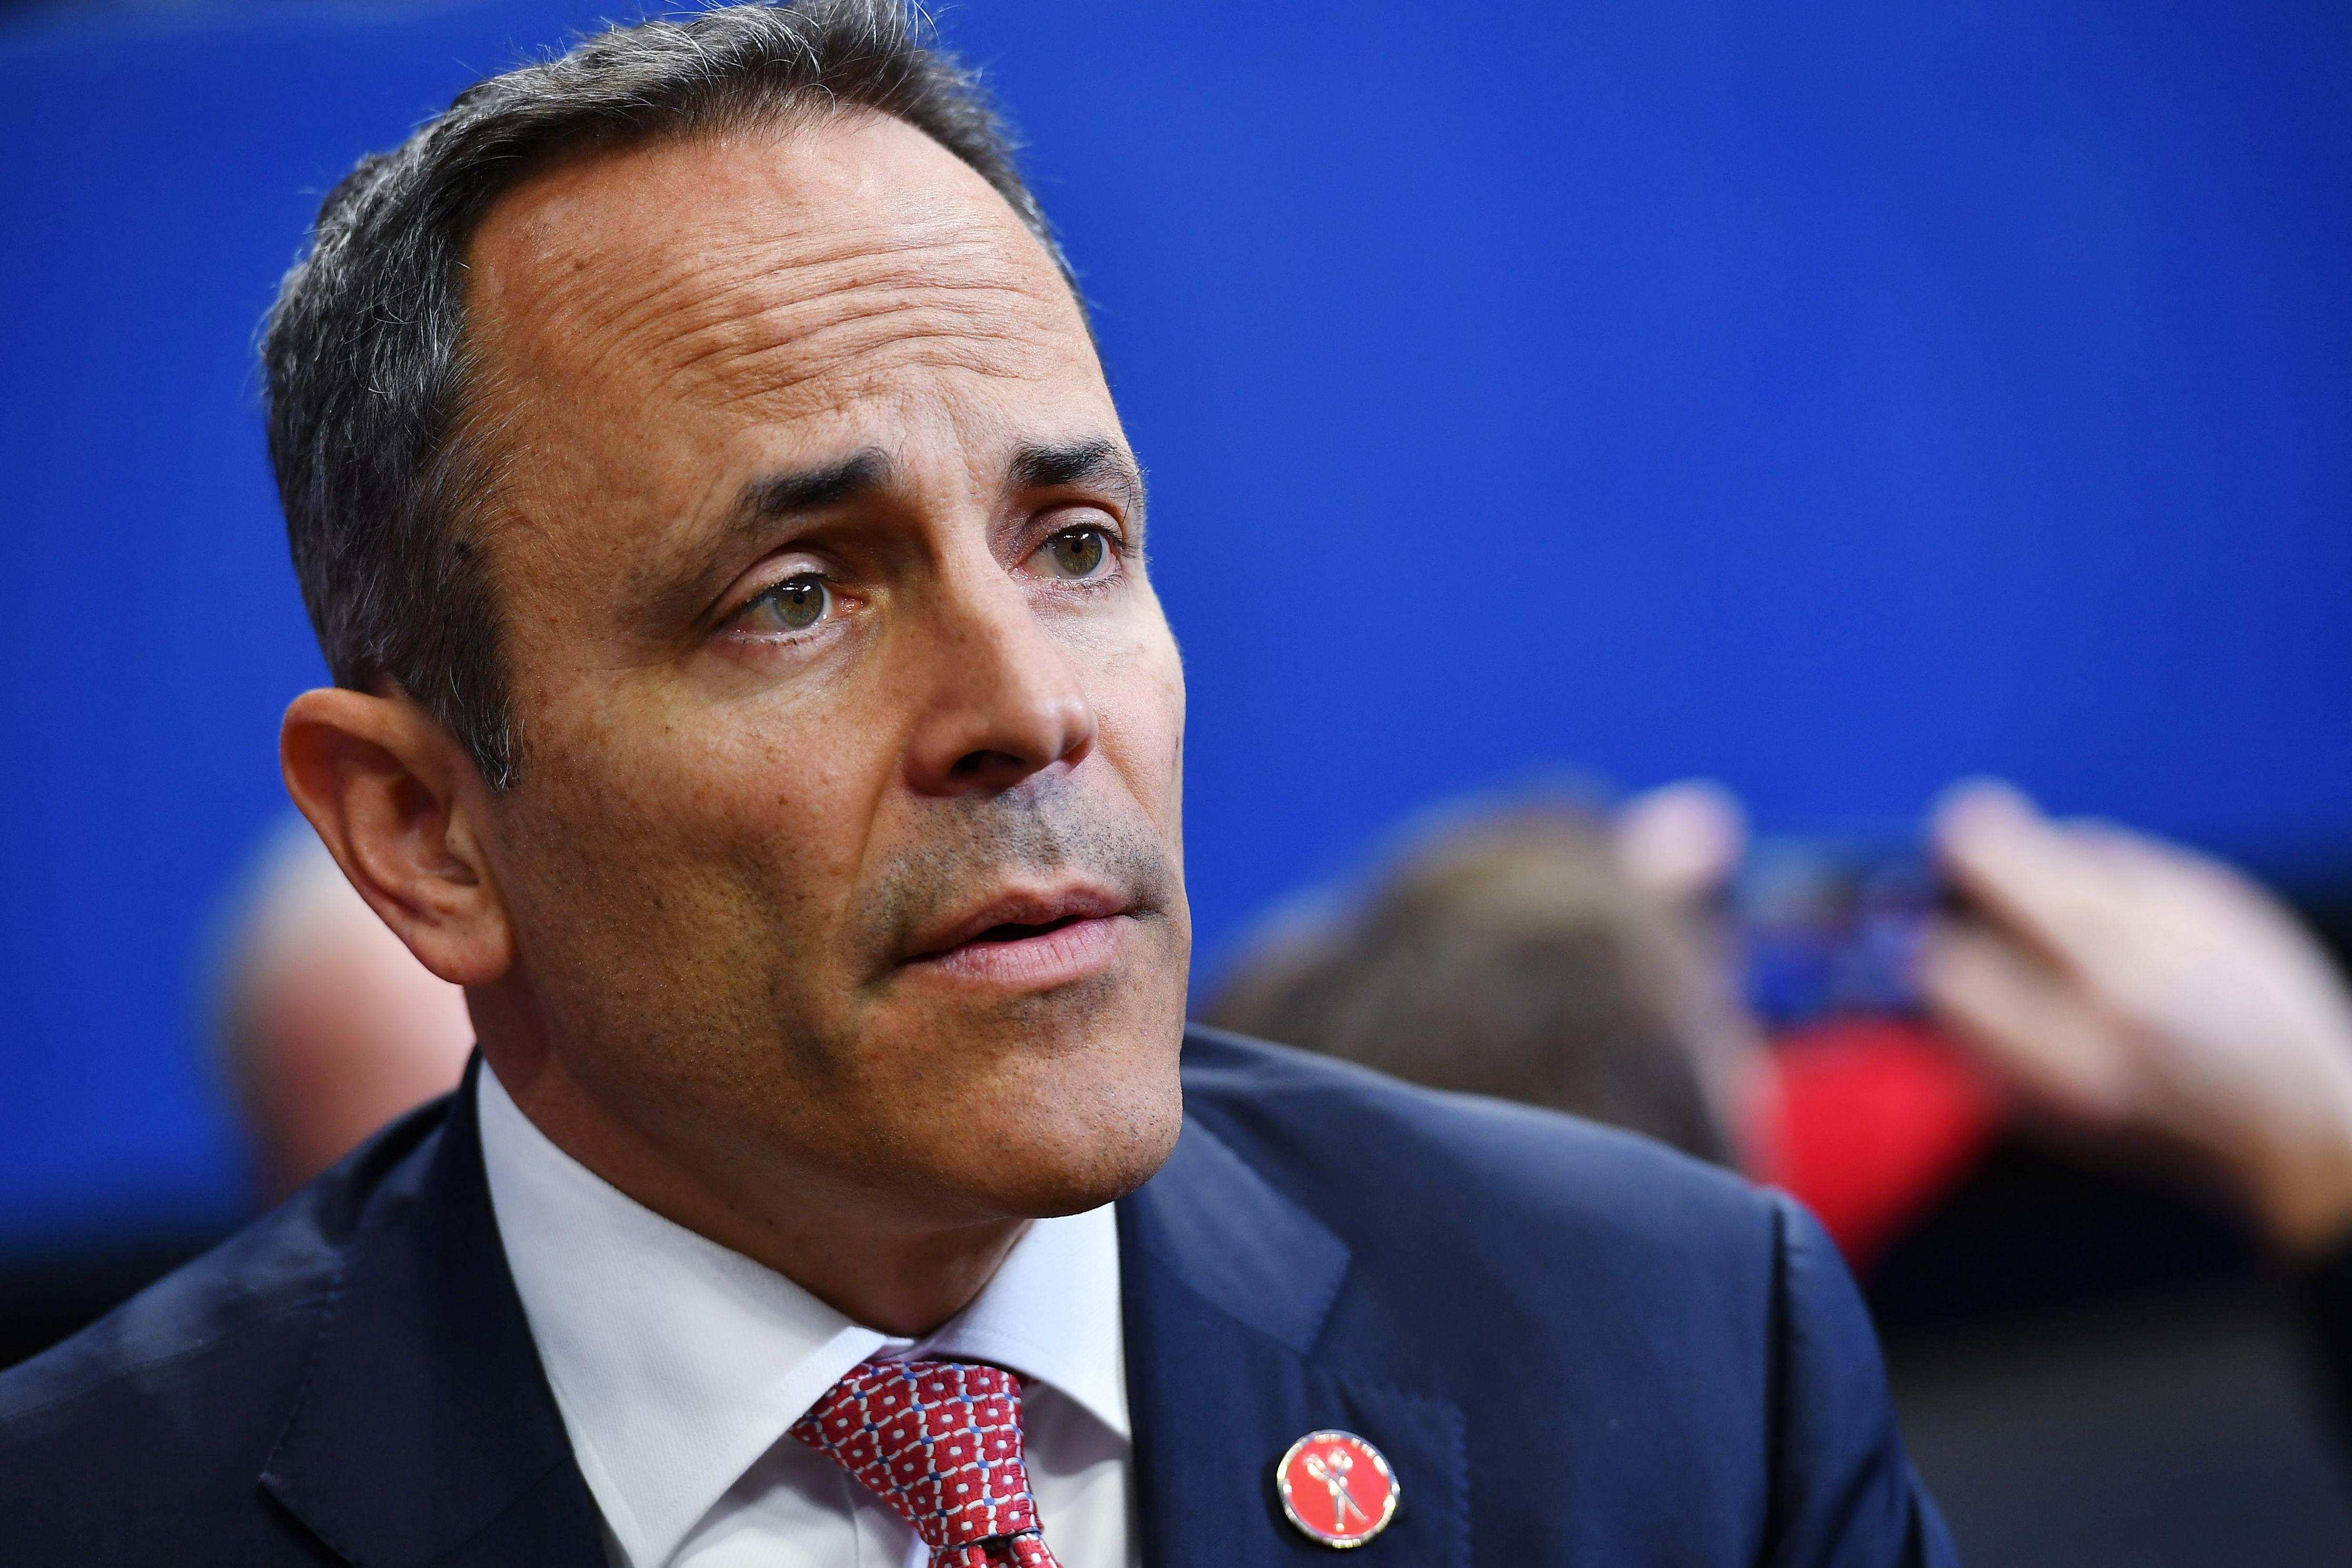 A close-up image of Matt Bevin dressed in a suit.